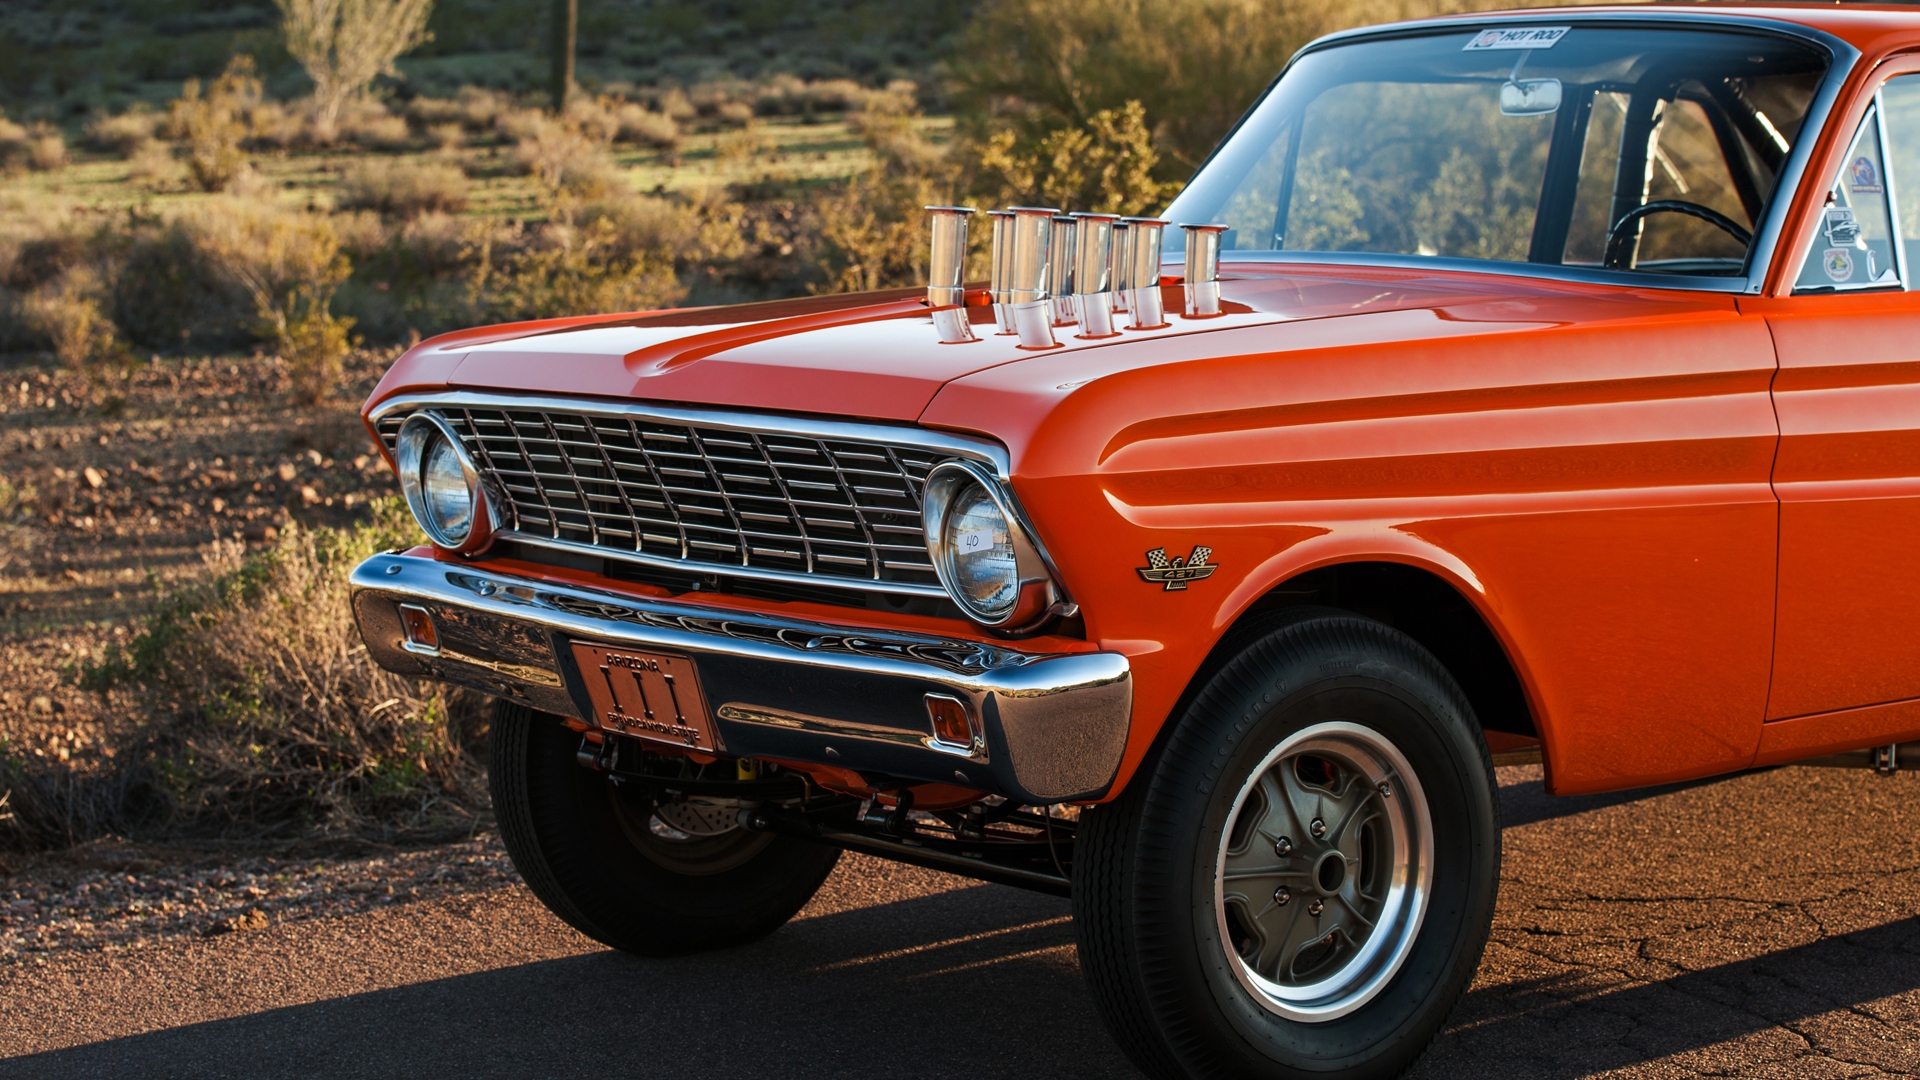 Vehicles 1964 Ford Falcon HD Wallpaper | Background Image